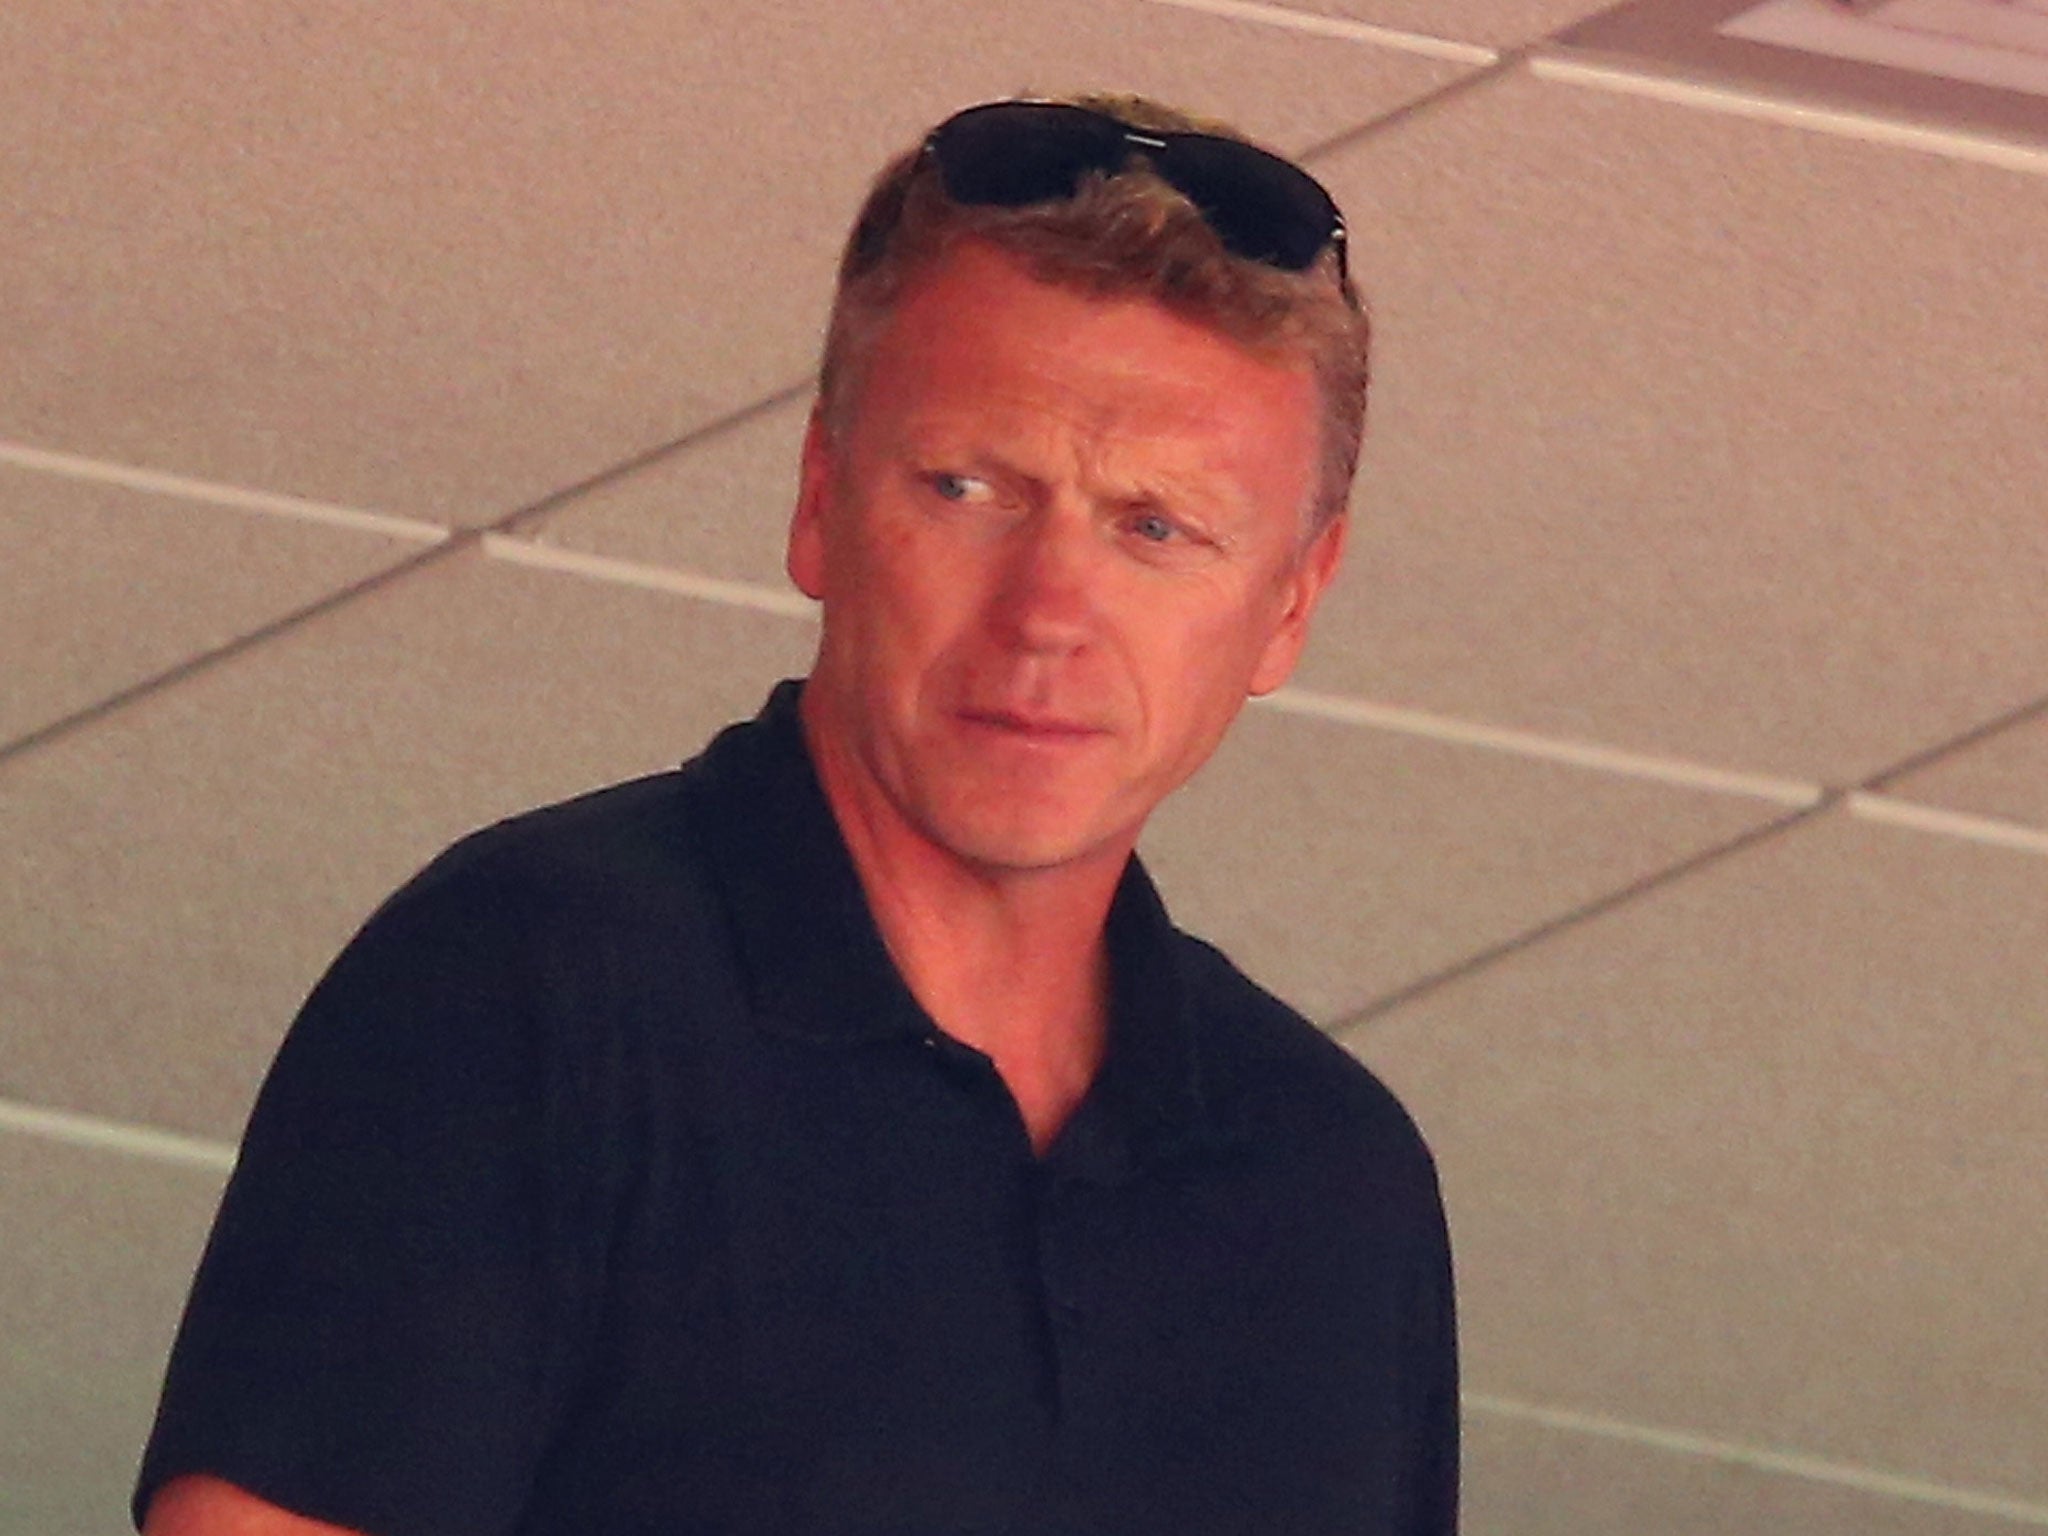 David Moyes looks on from the stands during the International friendly match between Ecuador and England